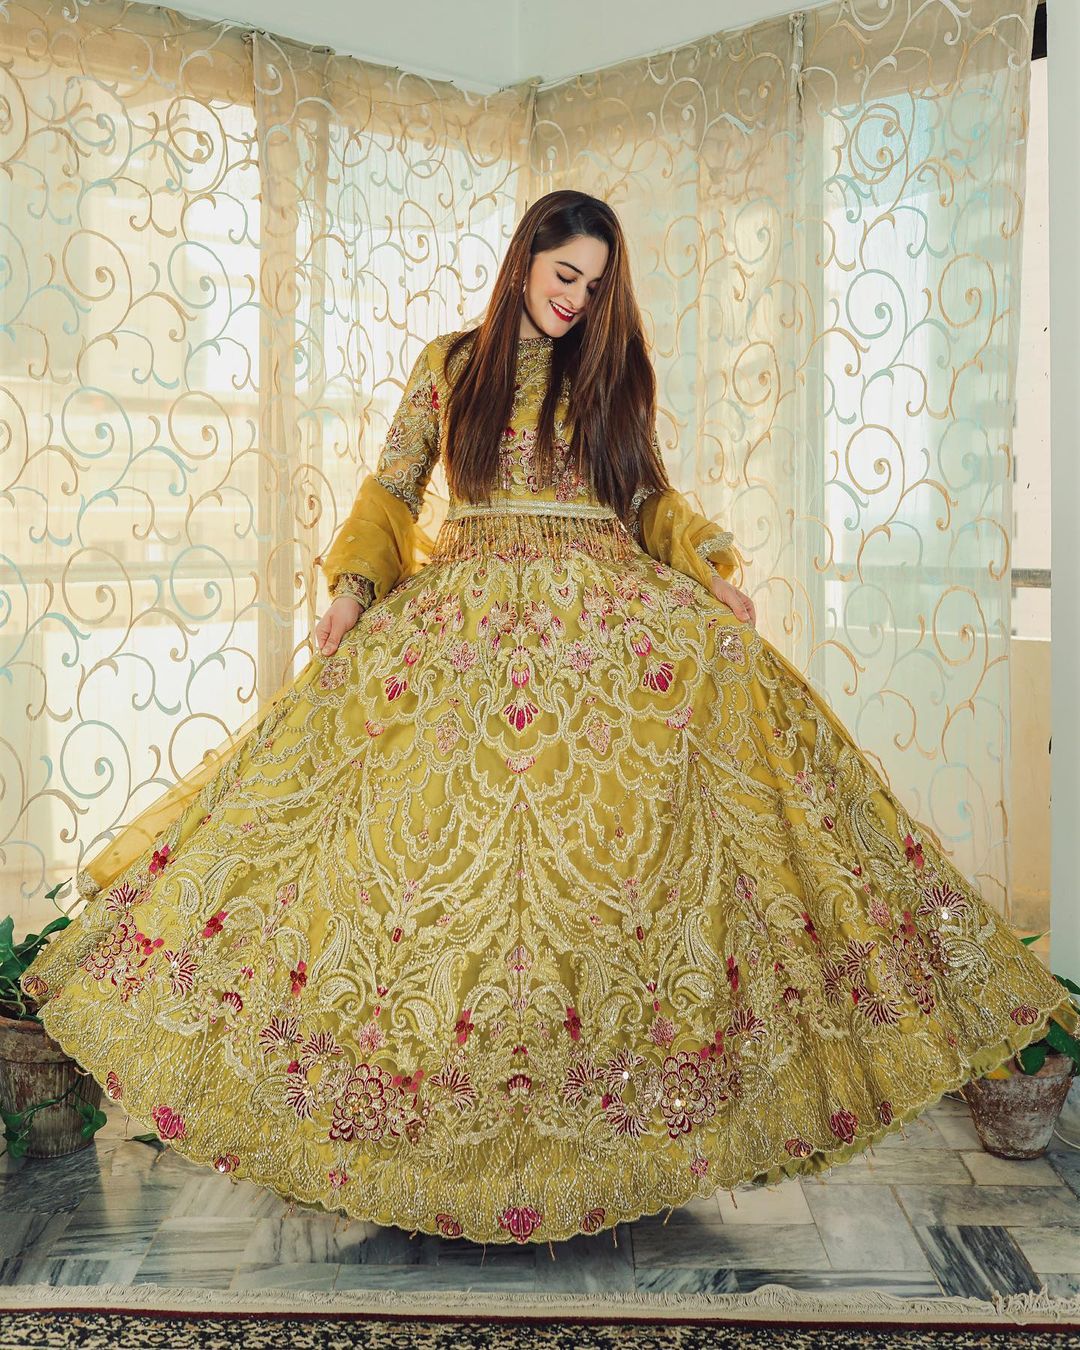 Aiman Khan is Looking Gorgeous in this Yellow Bridal Dress